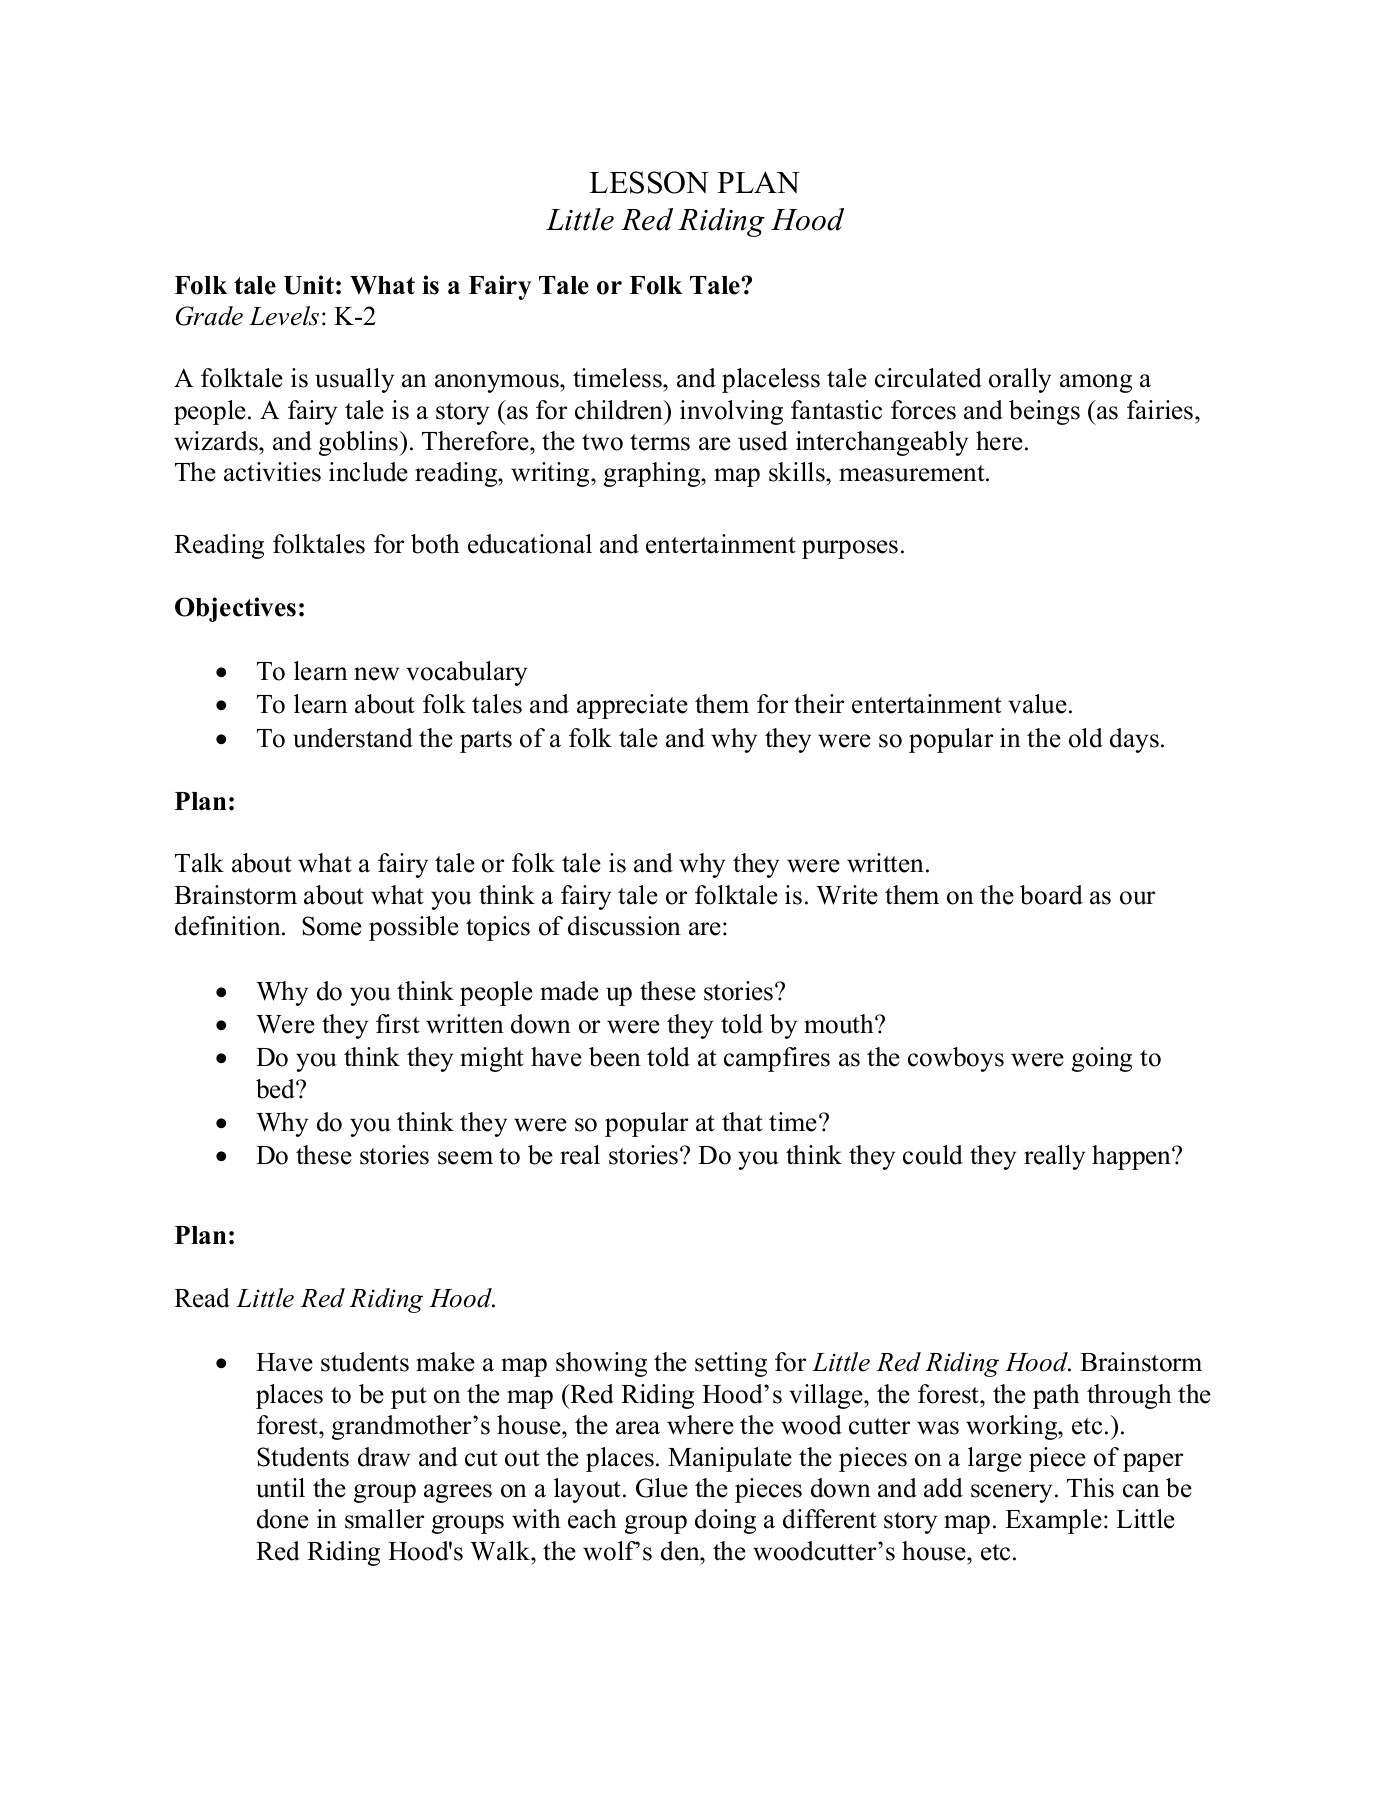 Lesson Plan Little Red Riding Hood - Eztales Pages 1 - 4